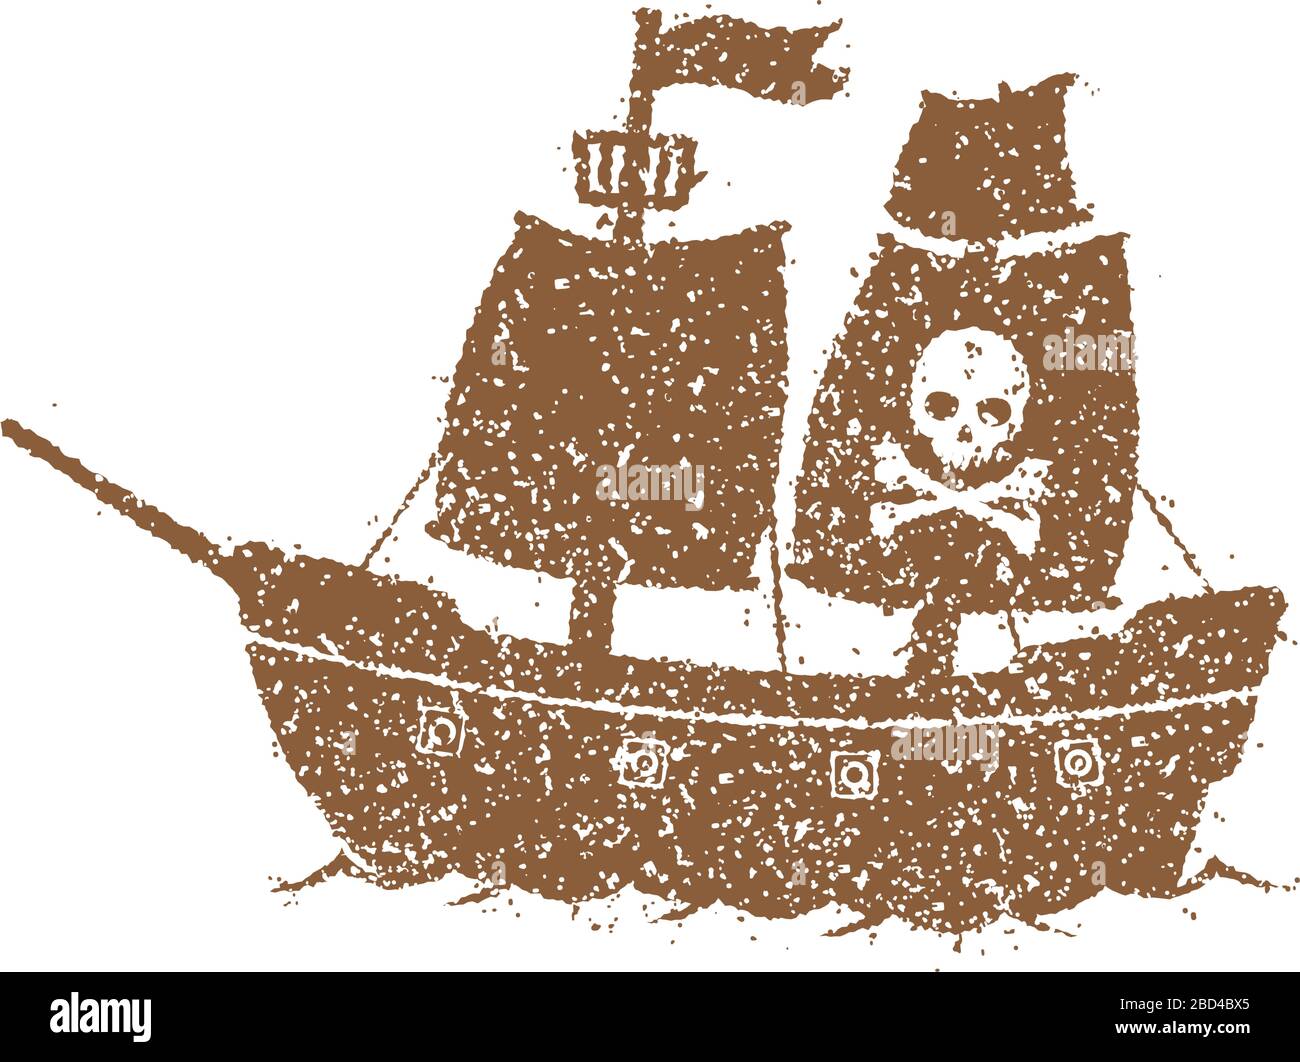 Pirate Ship Front Stock Illustrations – 298 Pirate Ship Front Stock  Illustrations, Vectors & Clipart - Dreamstime